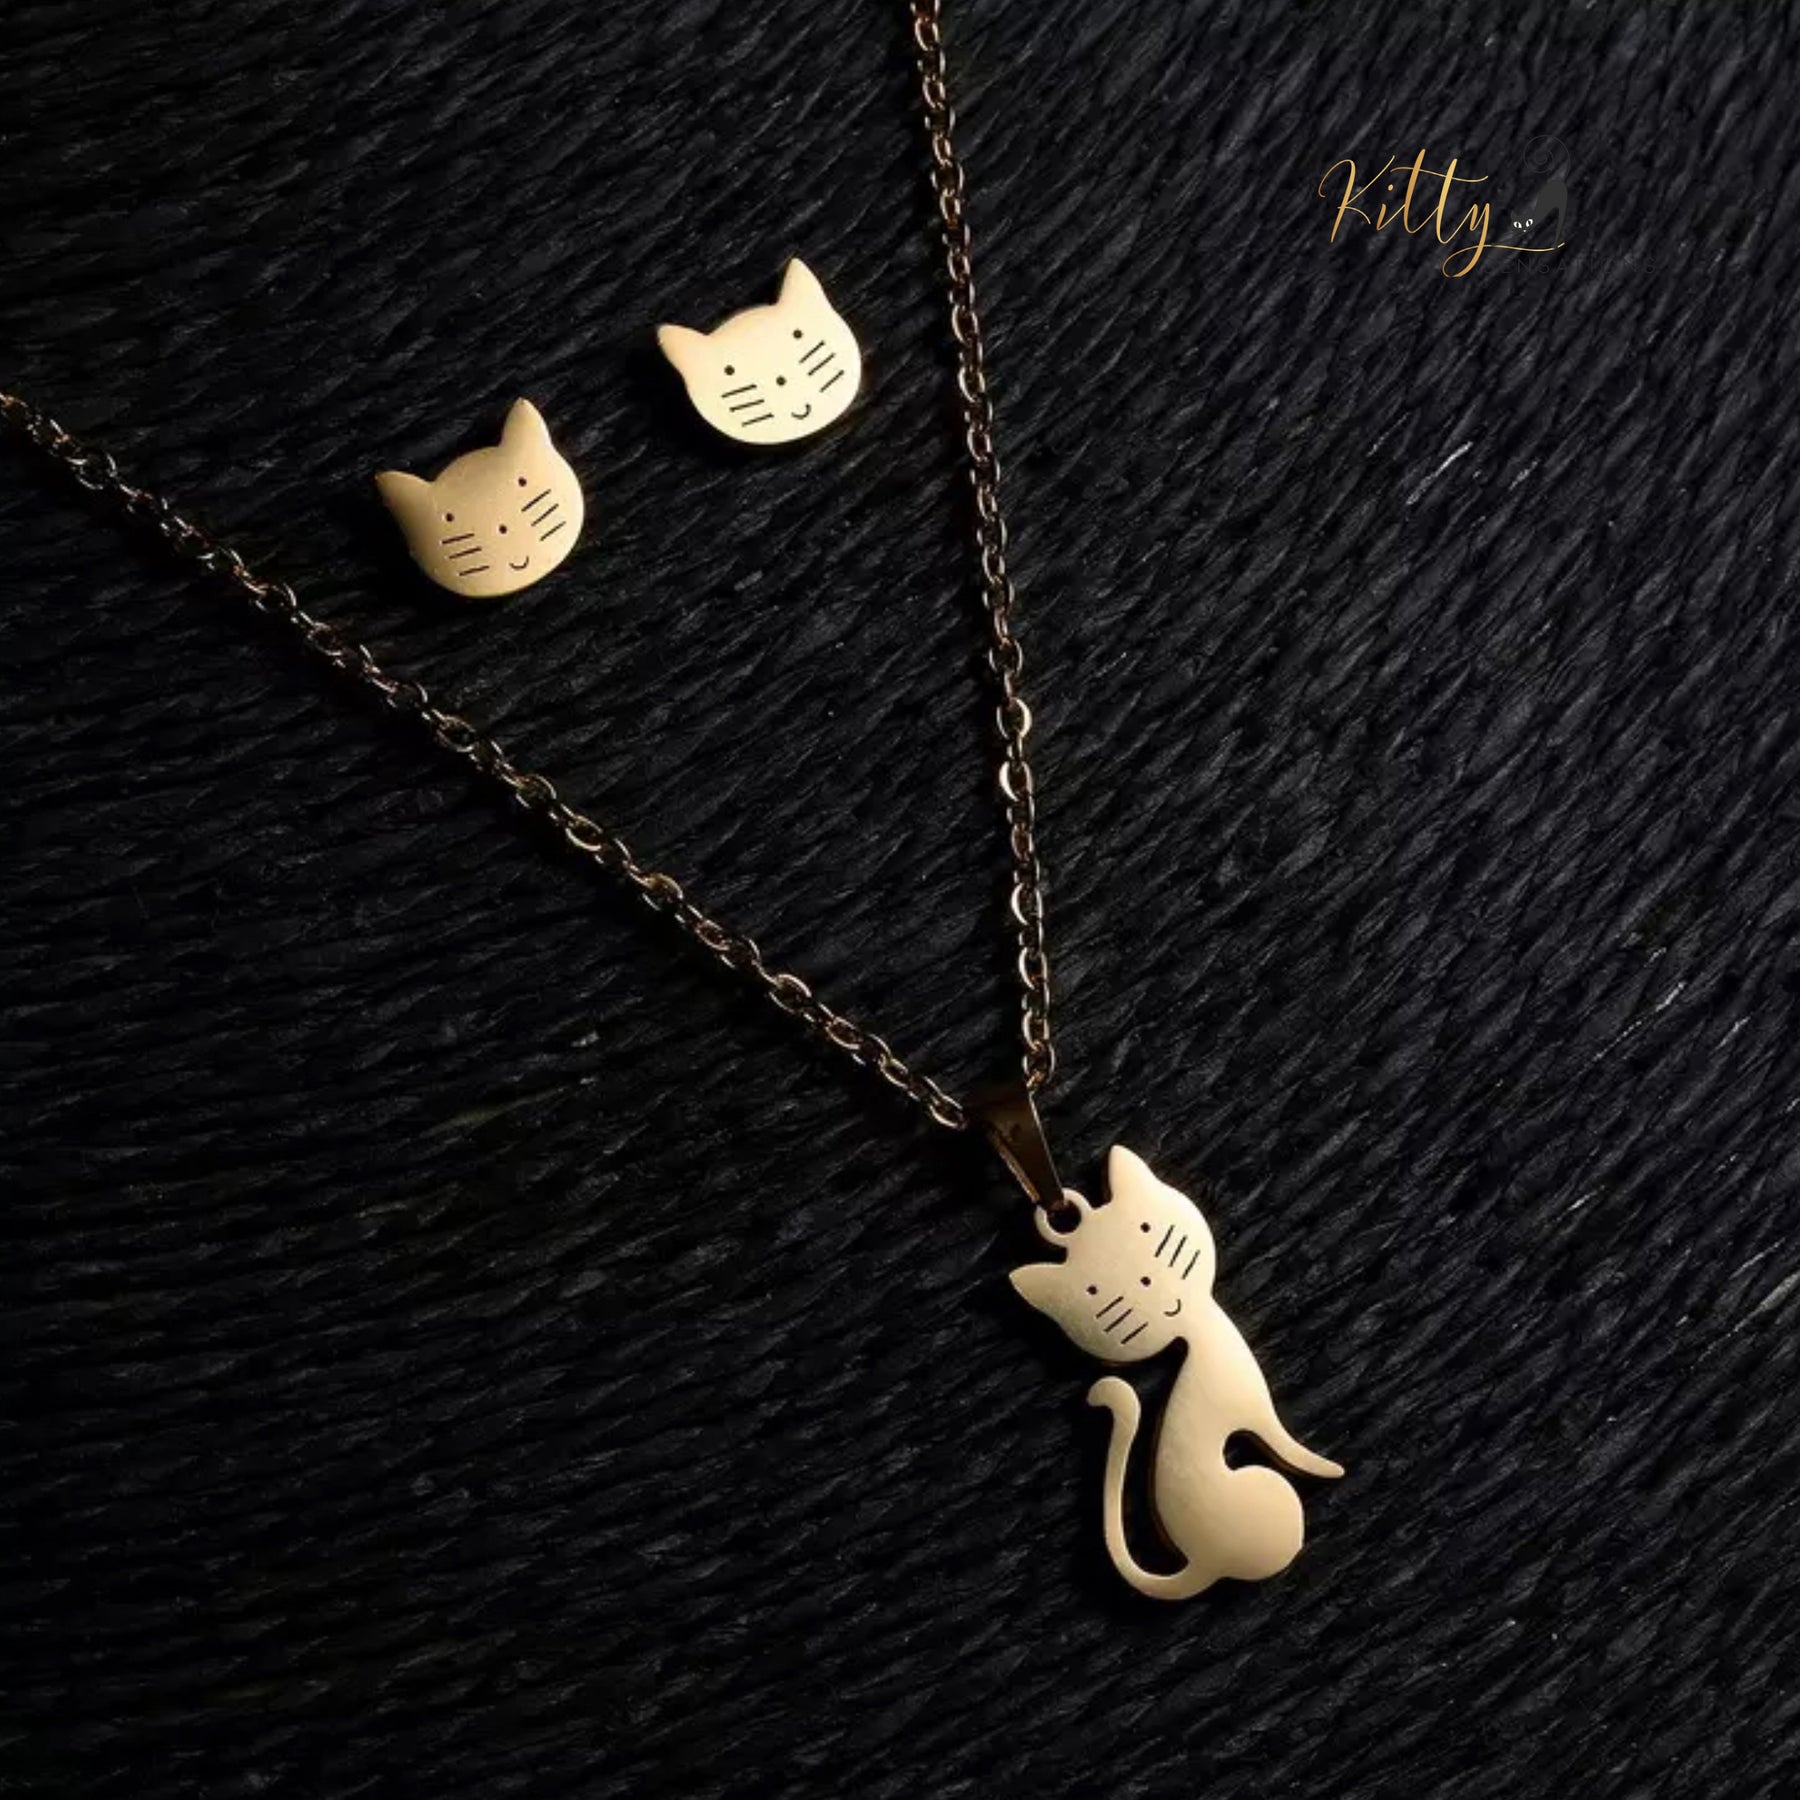 Happy Cat Gold Jewelry Set (Gold Plated) ($19.95): https://www.kittysensations.com/products/happy-cat-gold-plated-set